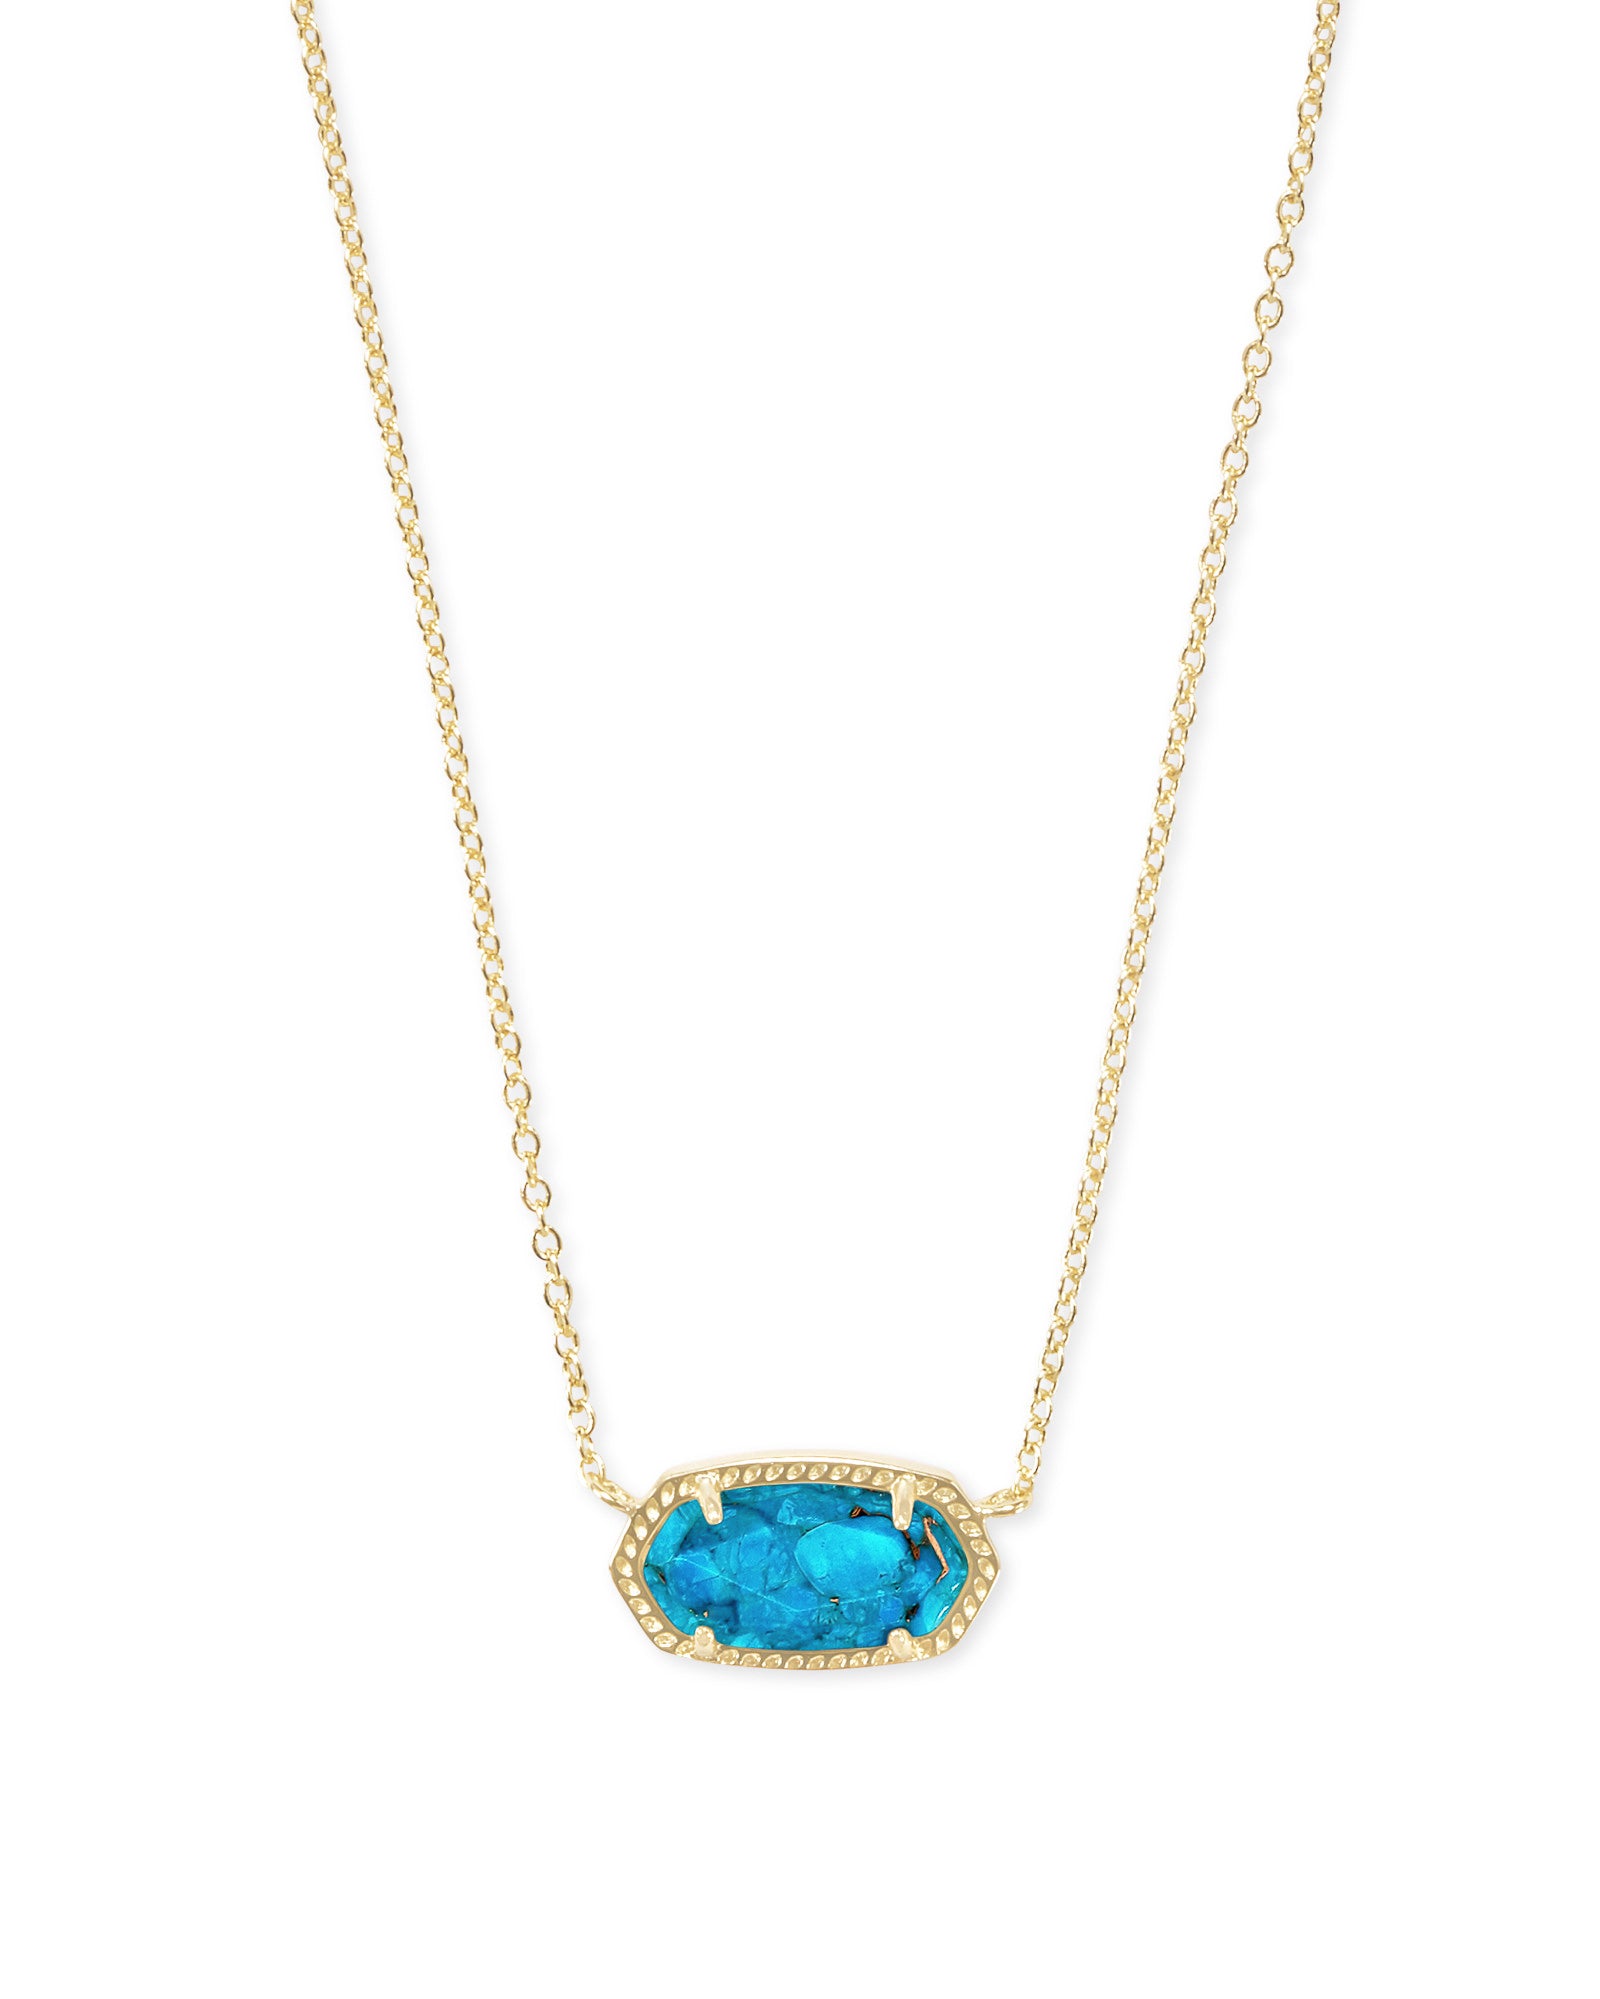 Elisa Gold - Bronze Veined Turquoise Necklace Front View